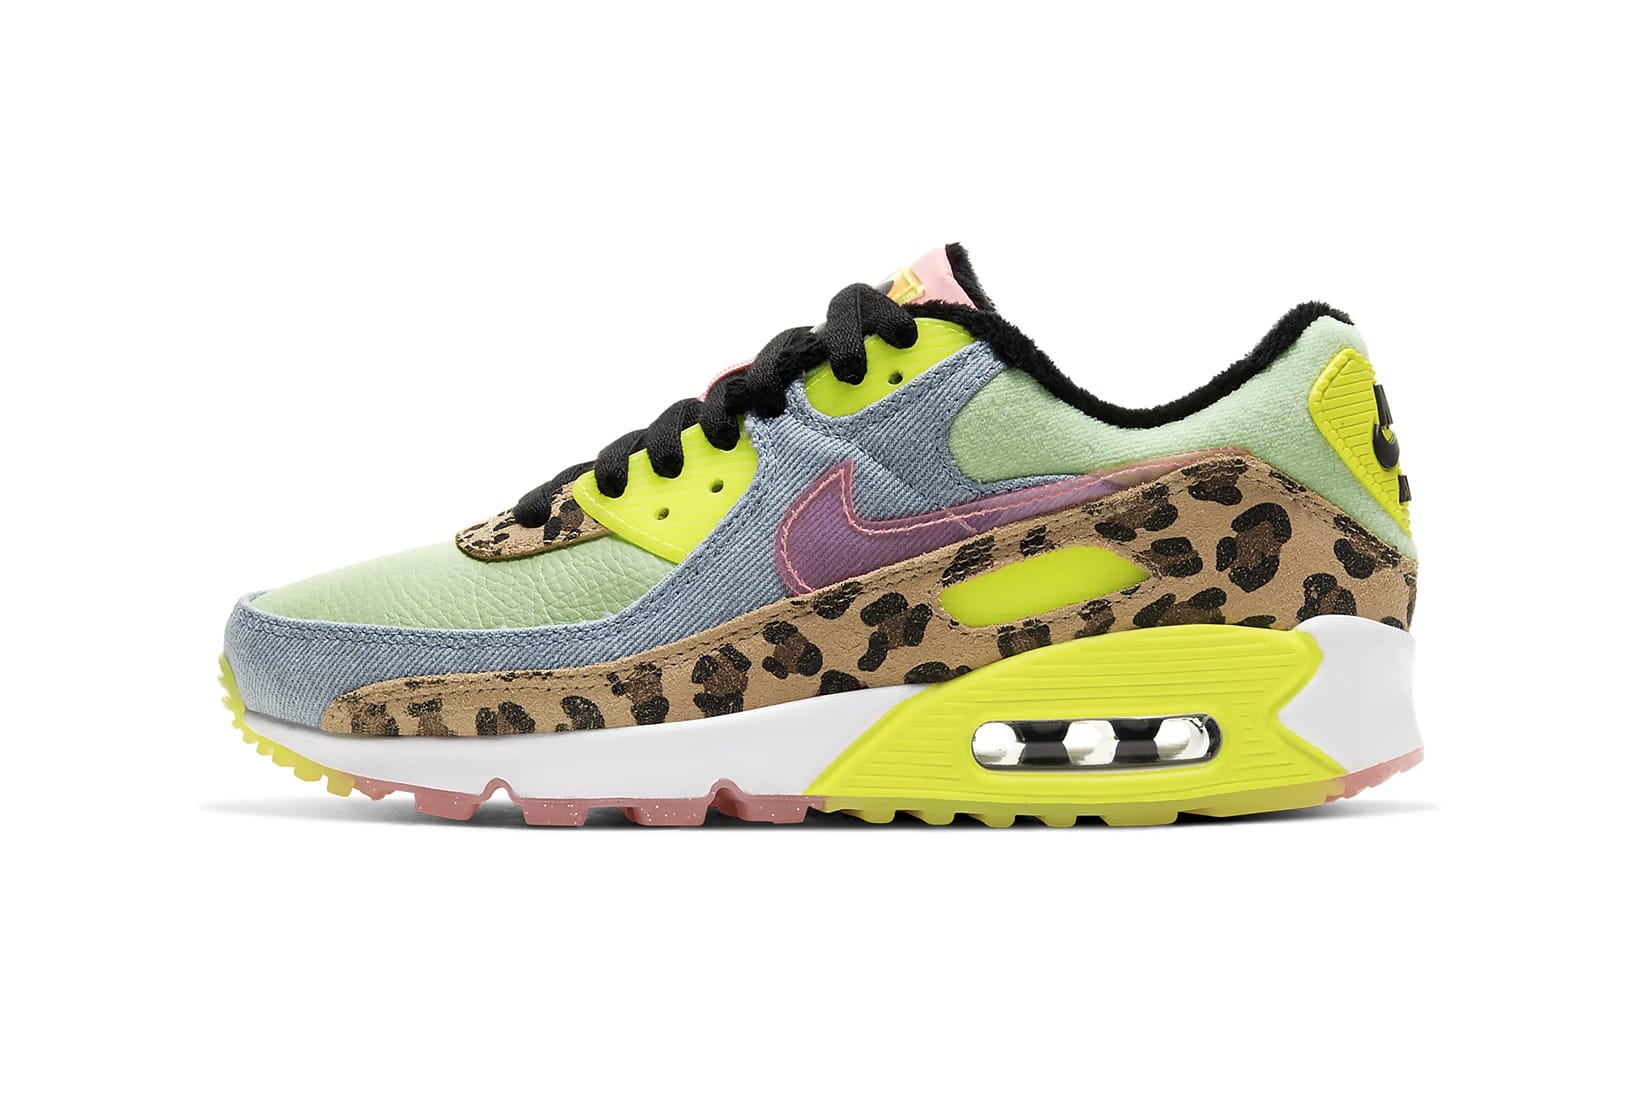 Nike Air Max 90 in Neon Green with Leopard Print | HYPEBAE